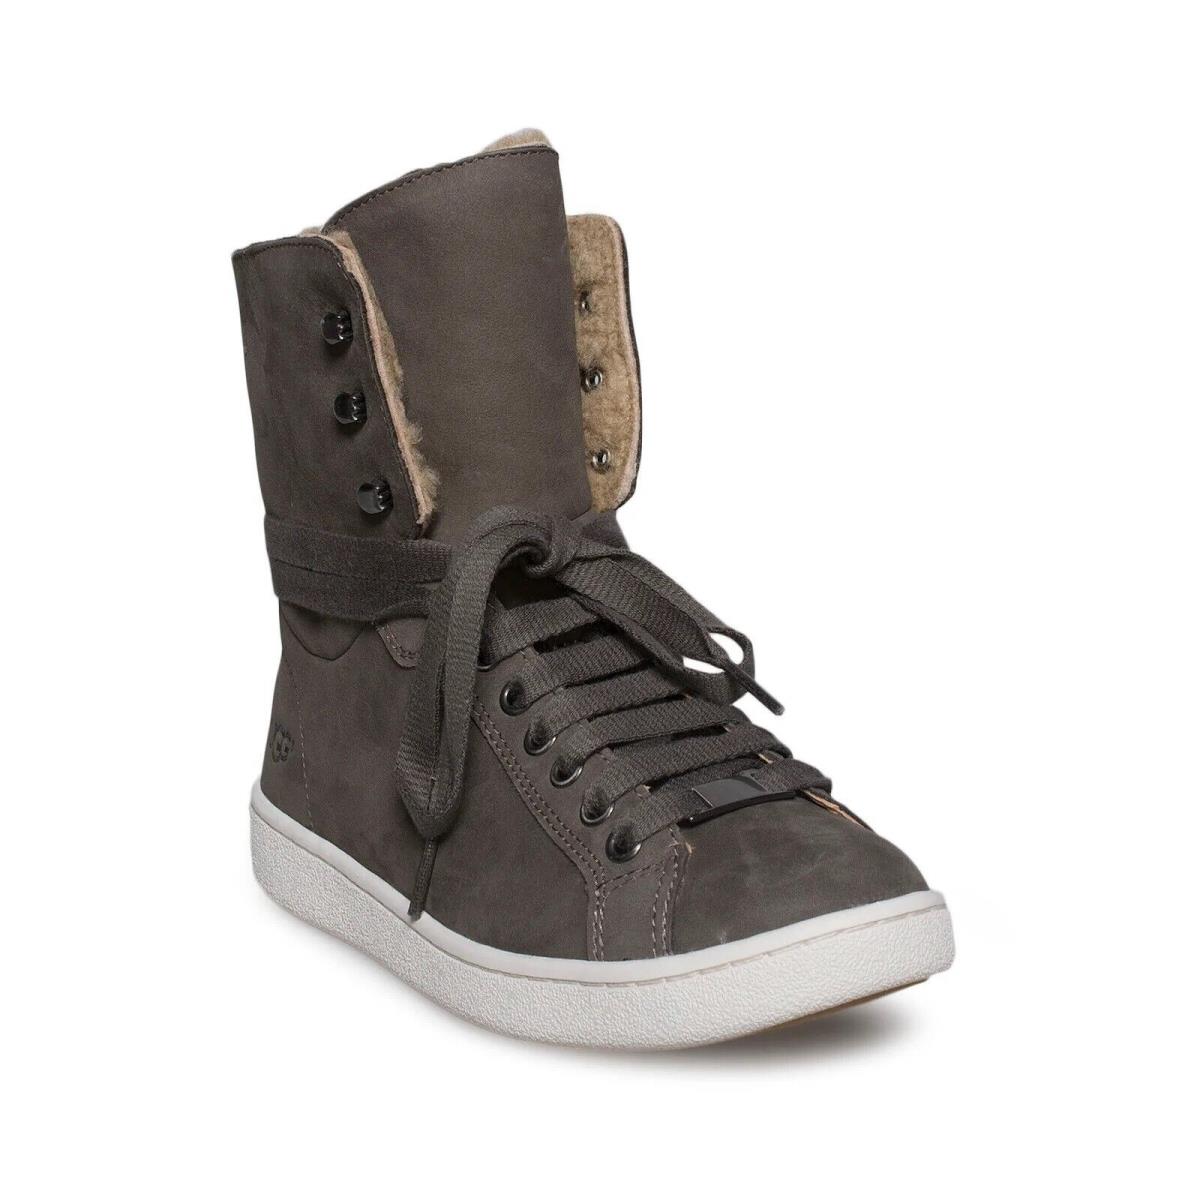 Ugg Starlyn Sheepskin Leather High Top Boots Shoes Brown Chocolate 8.5 - Brown-Chocolate